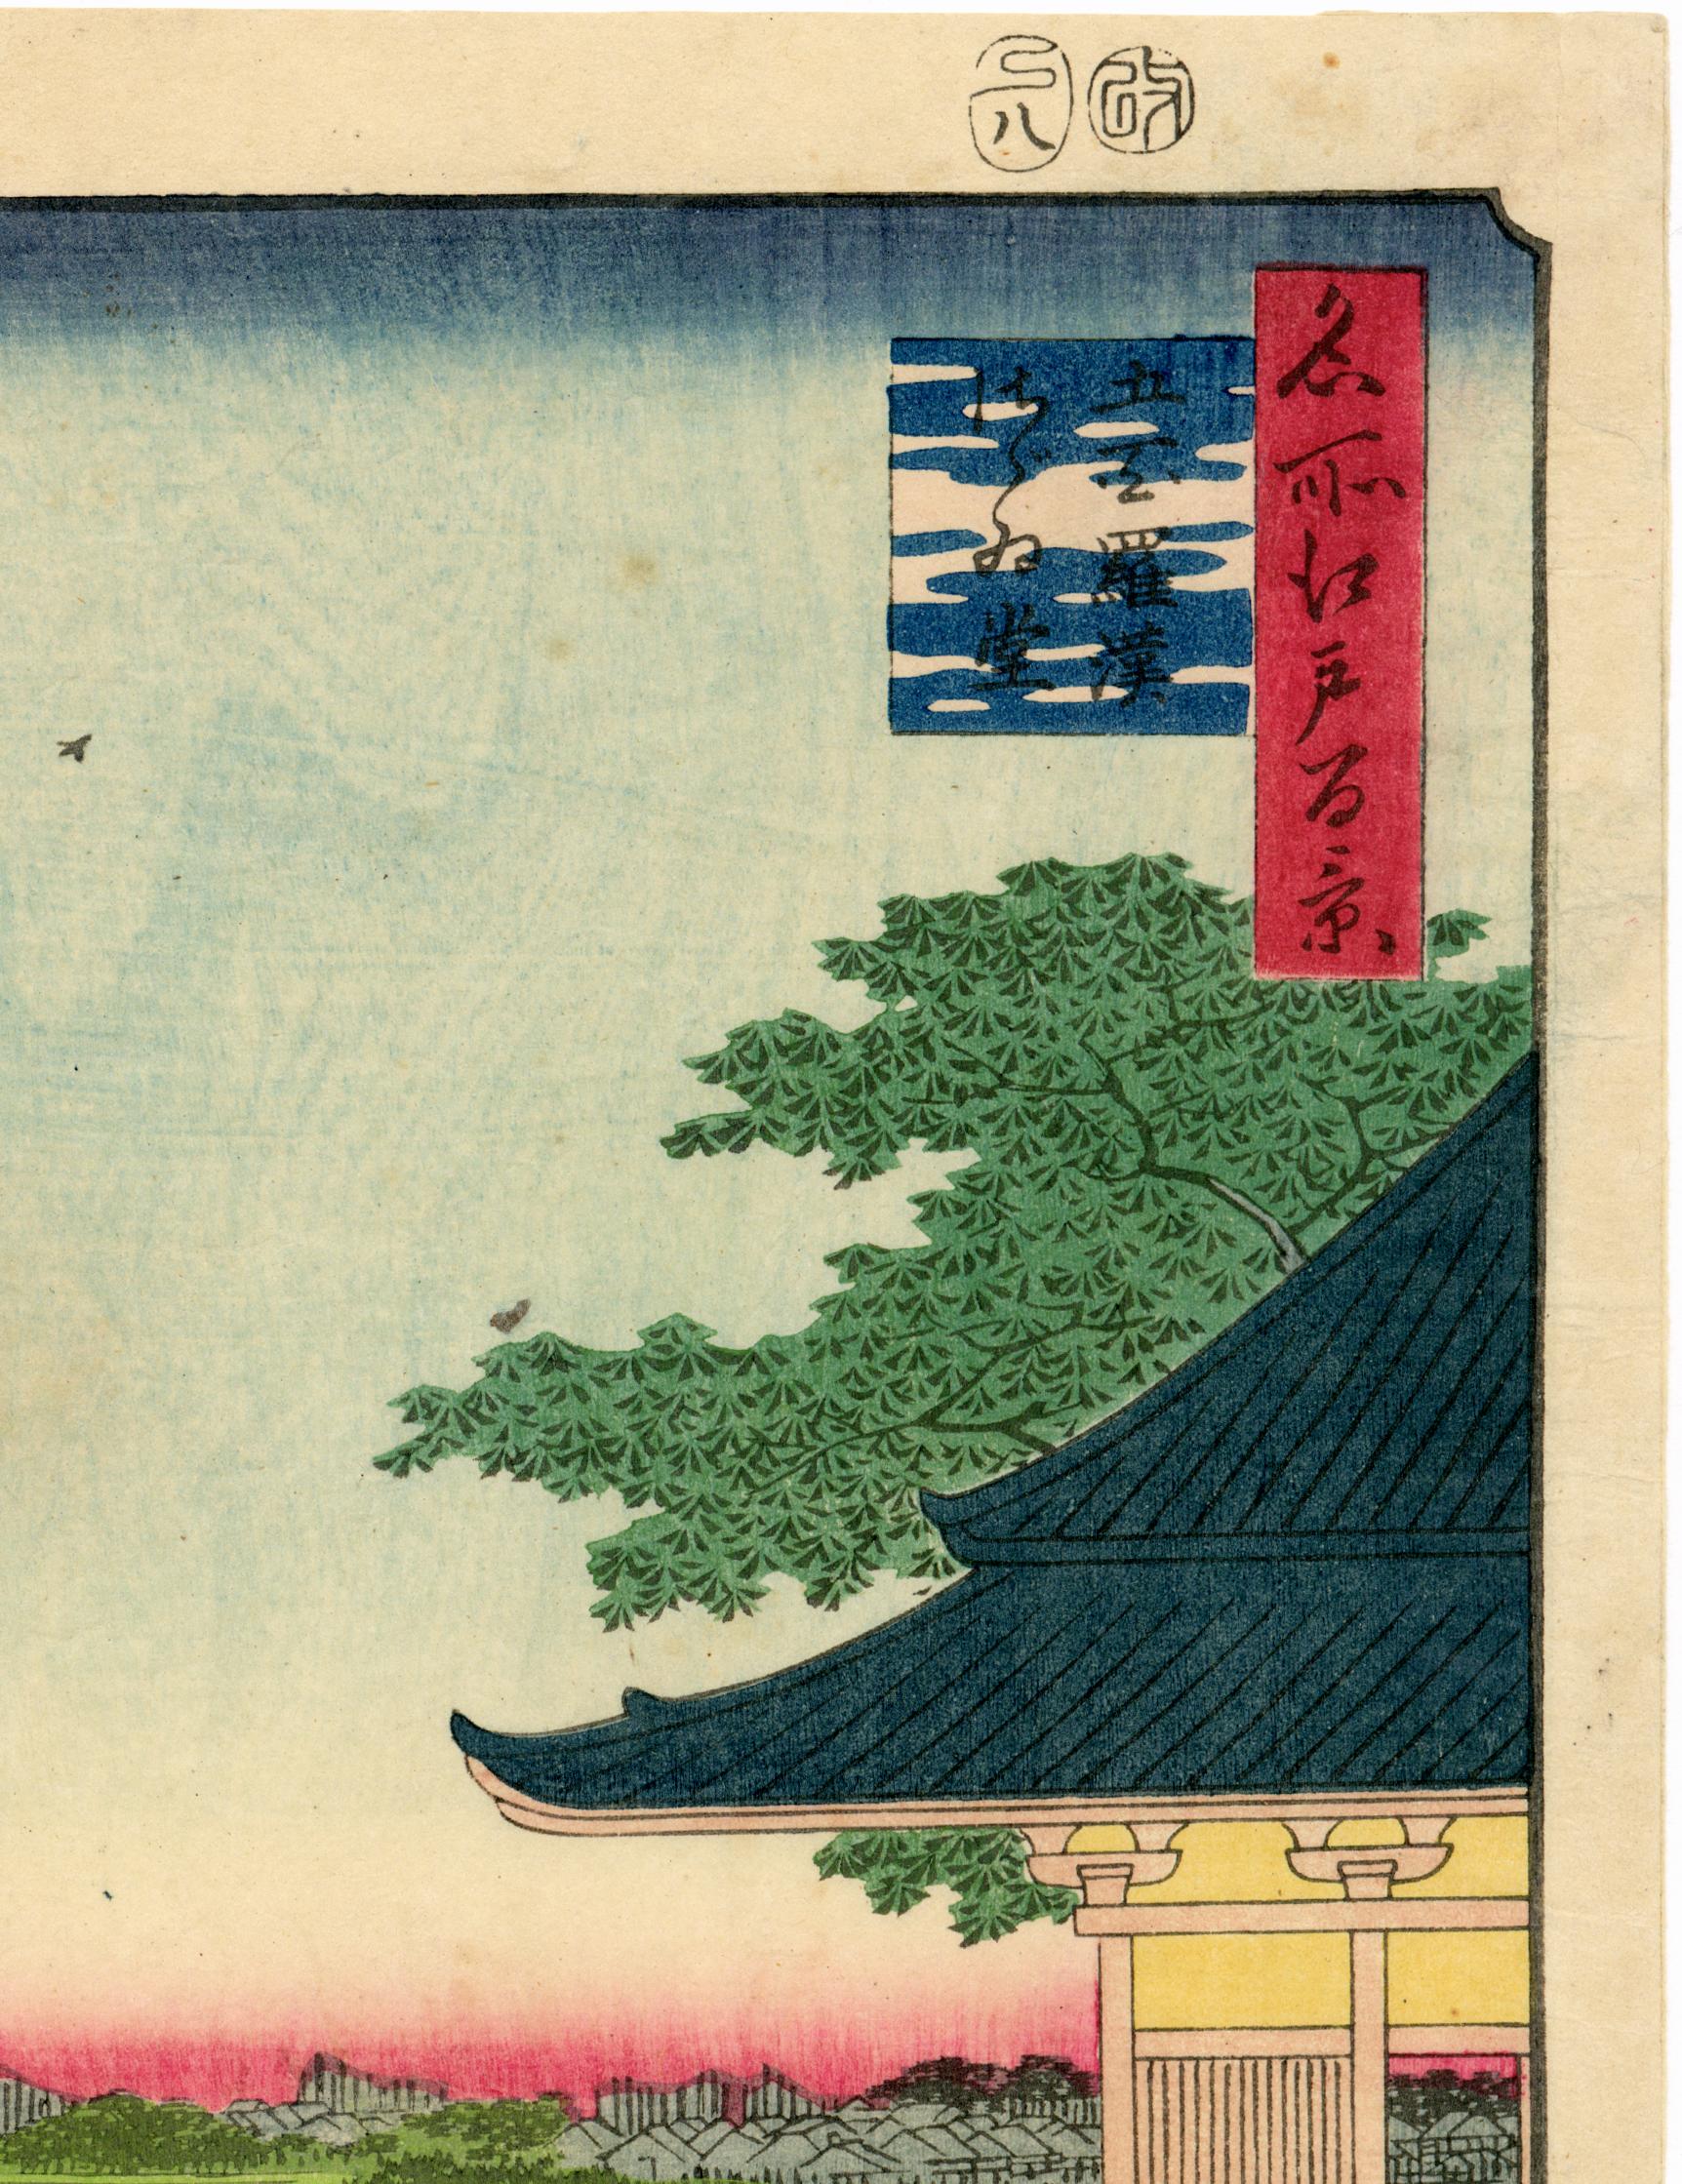 Original Japanese color woodblock print. Visitors enjoy the splendid view over the bright green fields on the eastern fringe of Edo. They would have just finished the condensed, mini-journey offered by this unusual building, which replicates three